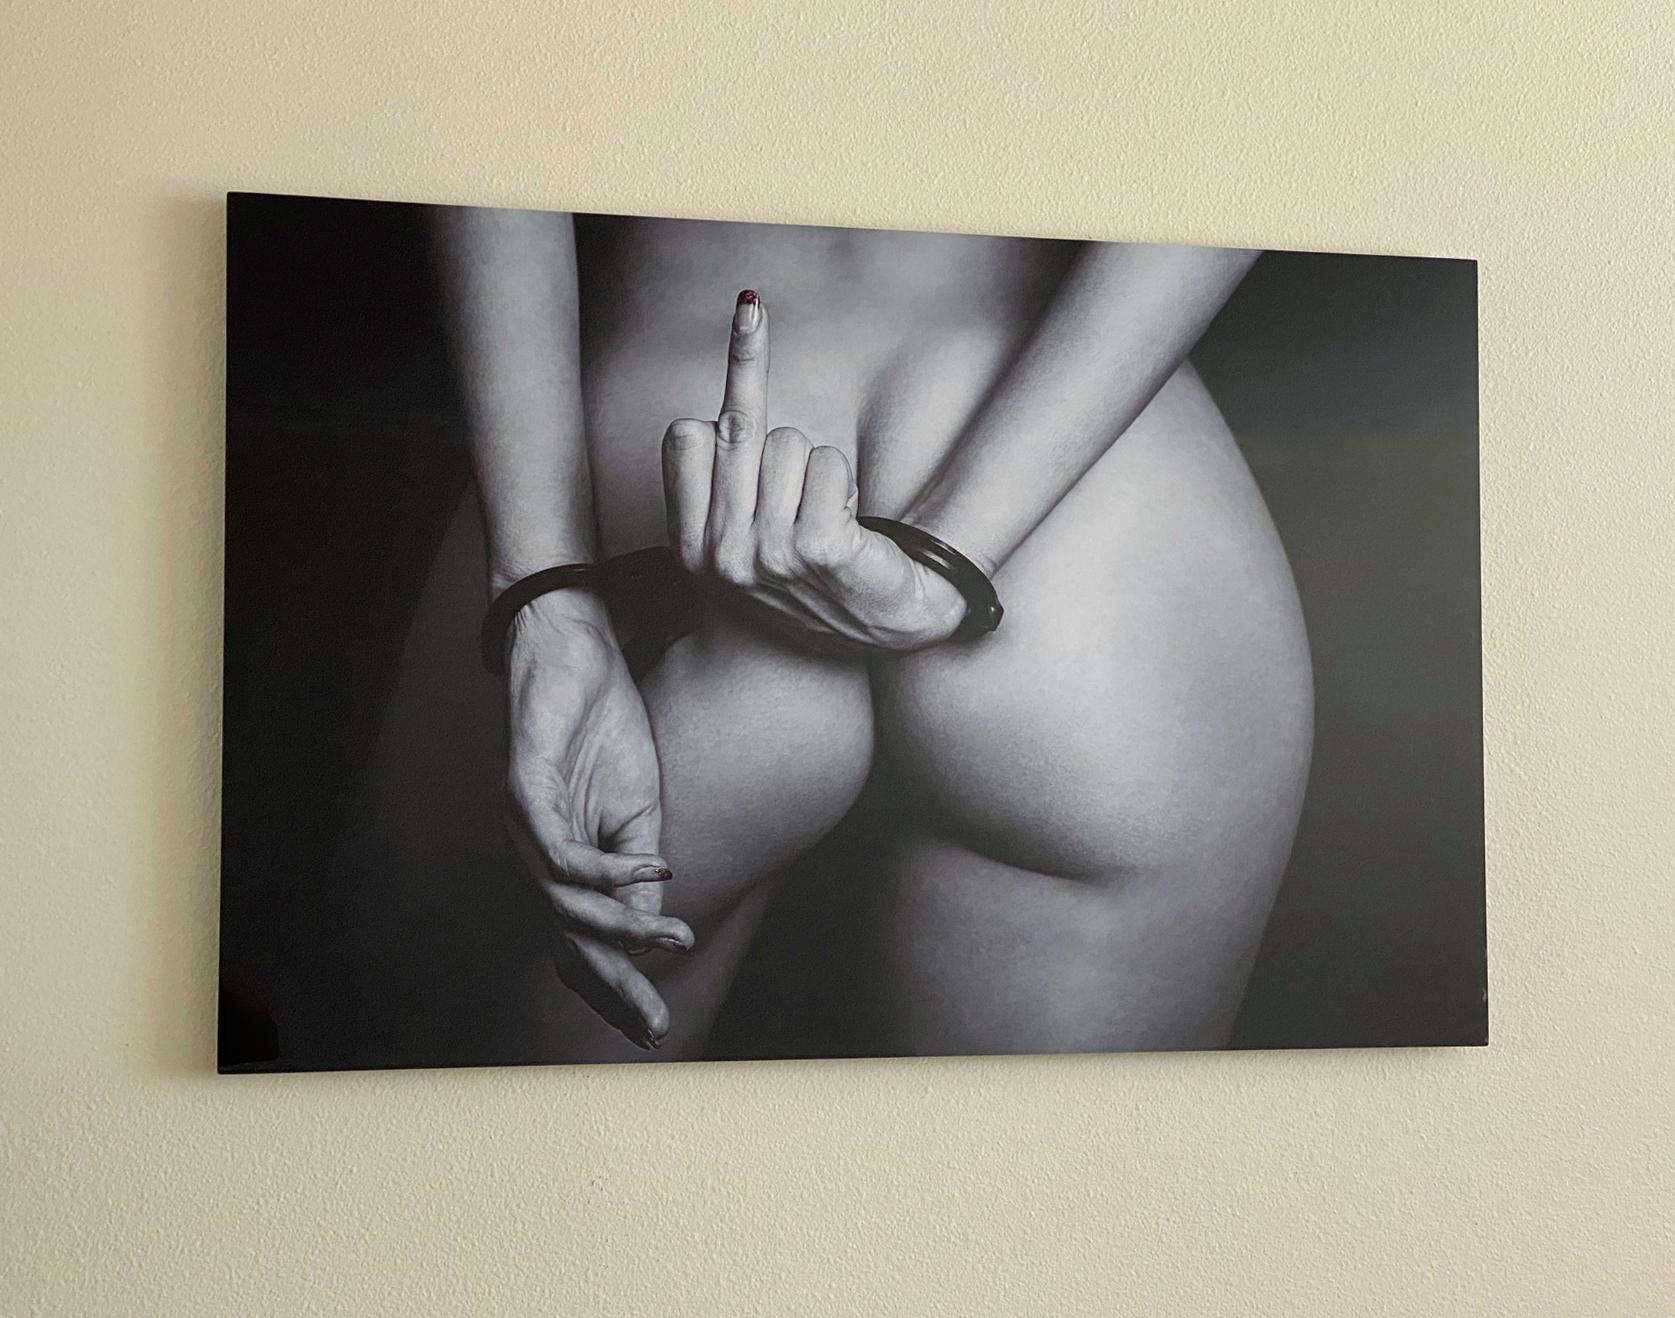 No Way - black and white nude photograph - print on aluminum 39